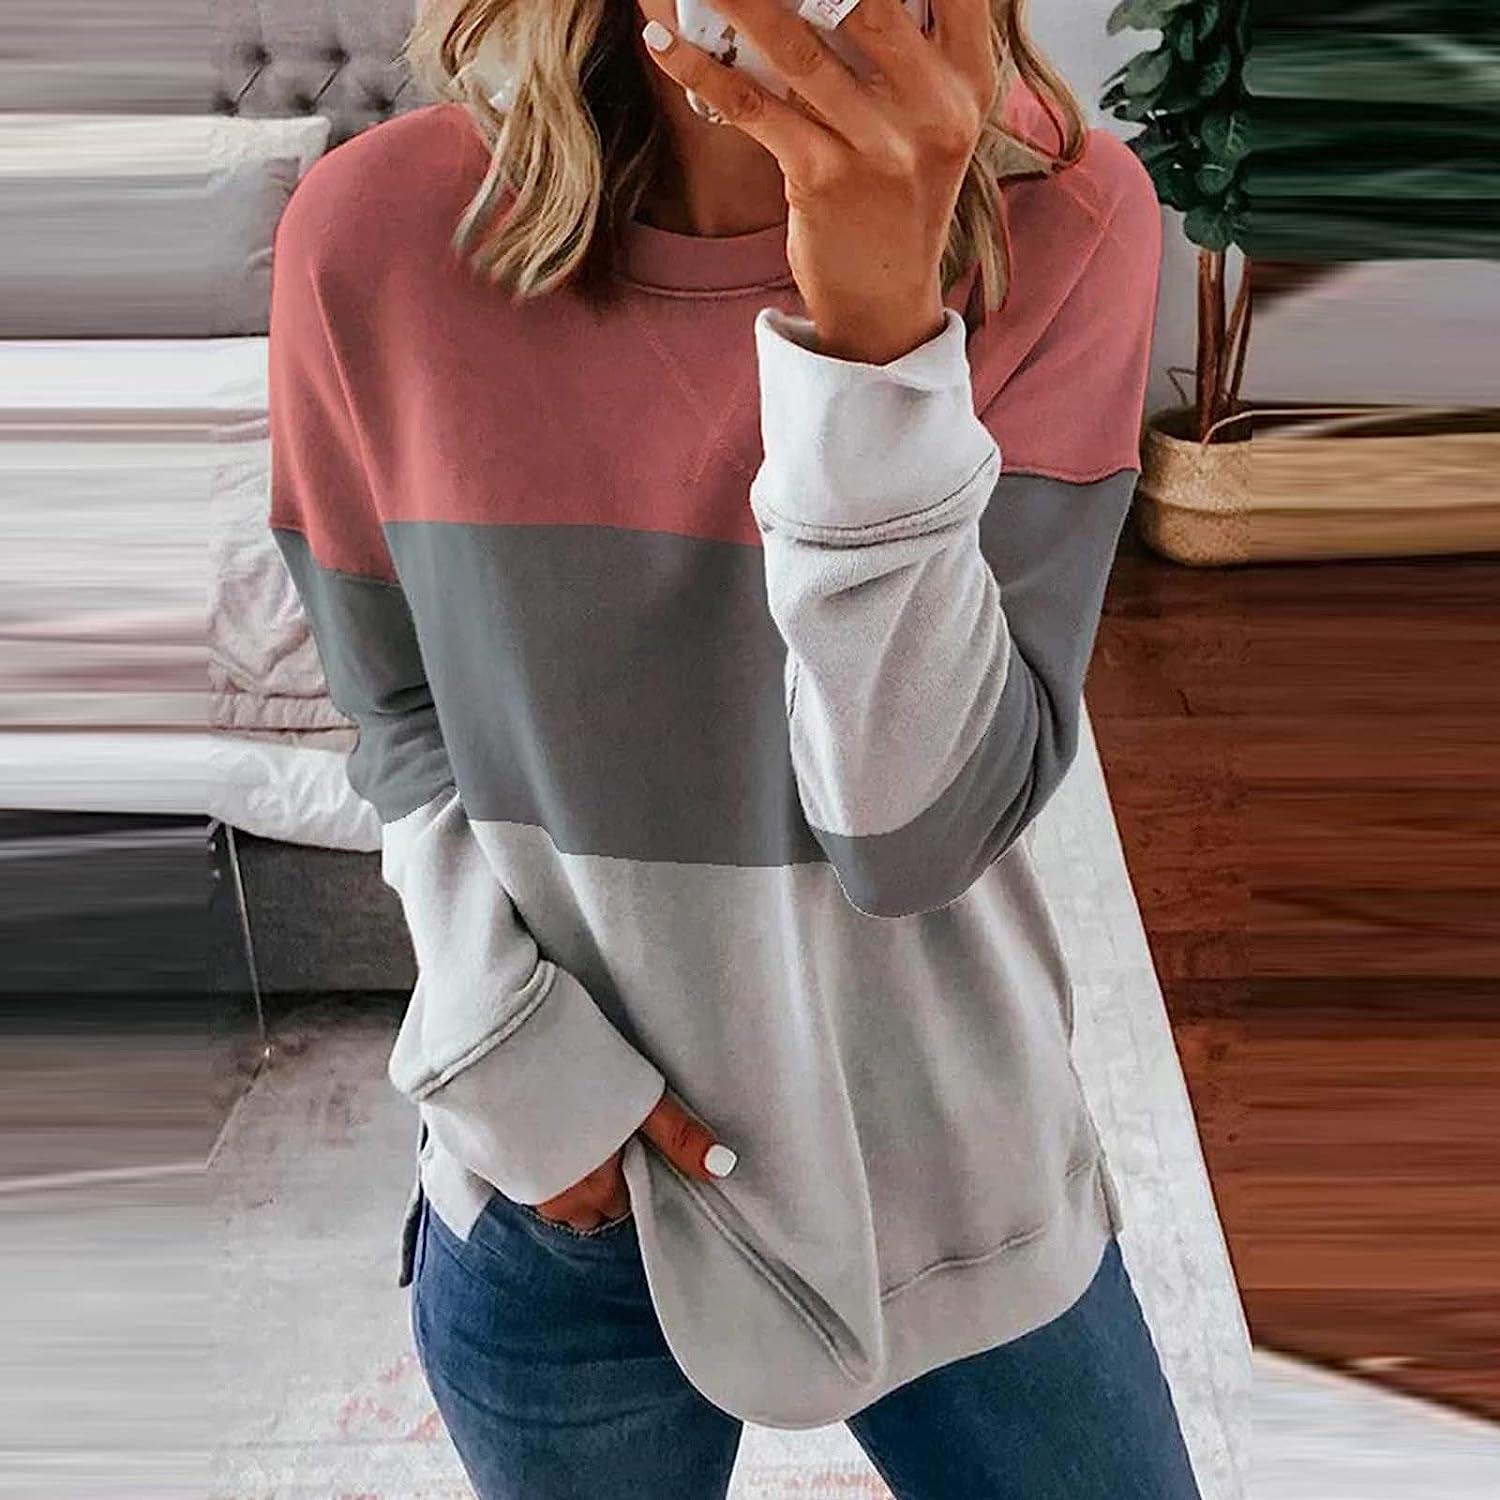 lighten deals of the day Oversized Sweatshirts For Women Long Sleeve  Crewneck Floral Print Fleece Pullover Tops Casual Loose Fall Clothes 2023  Women